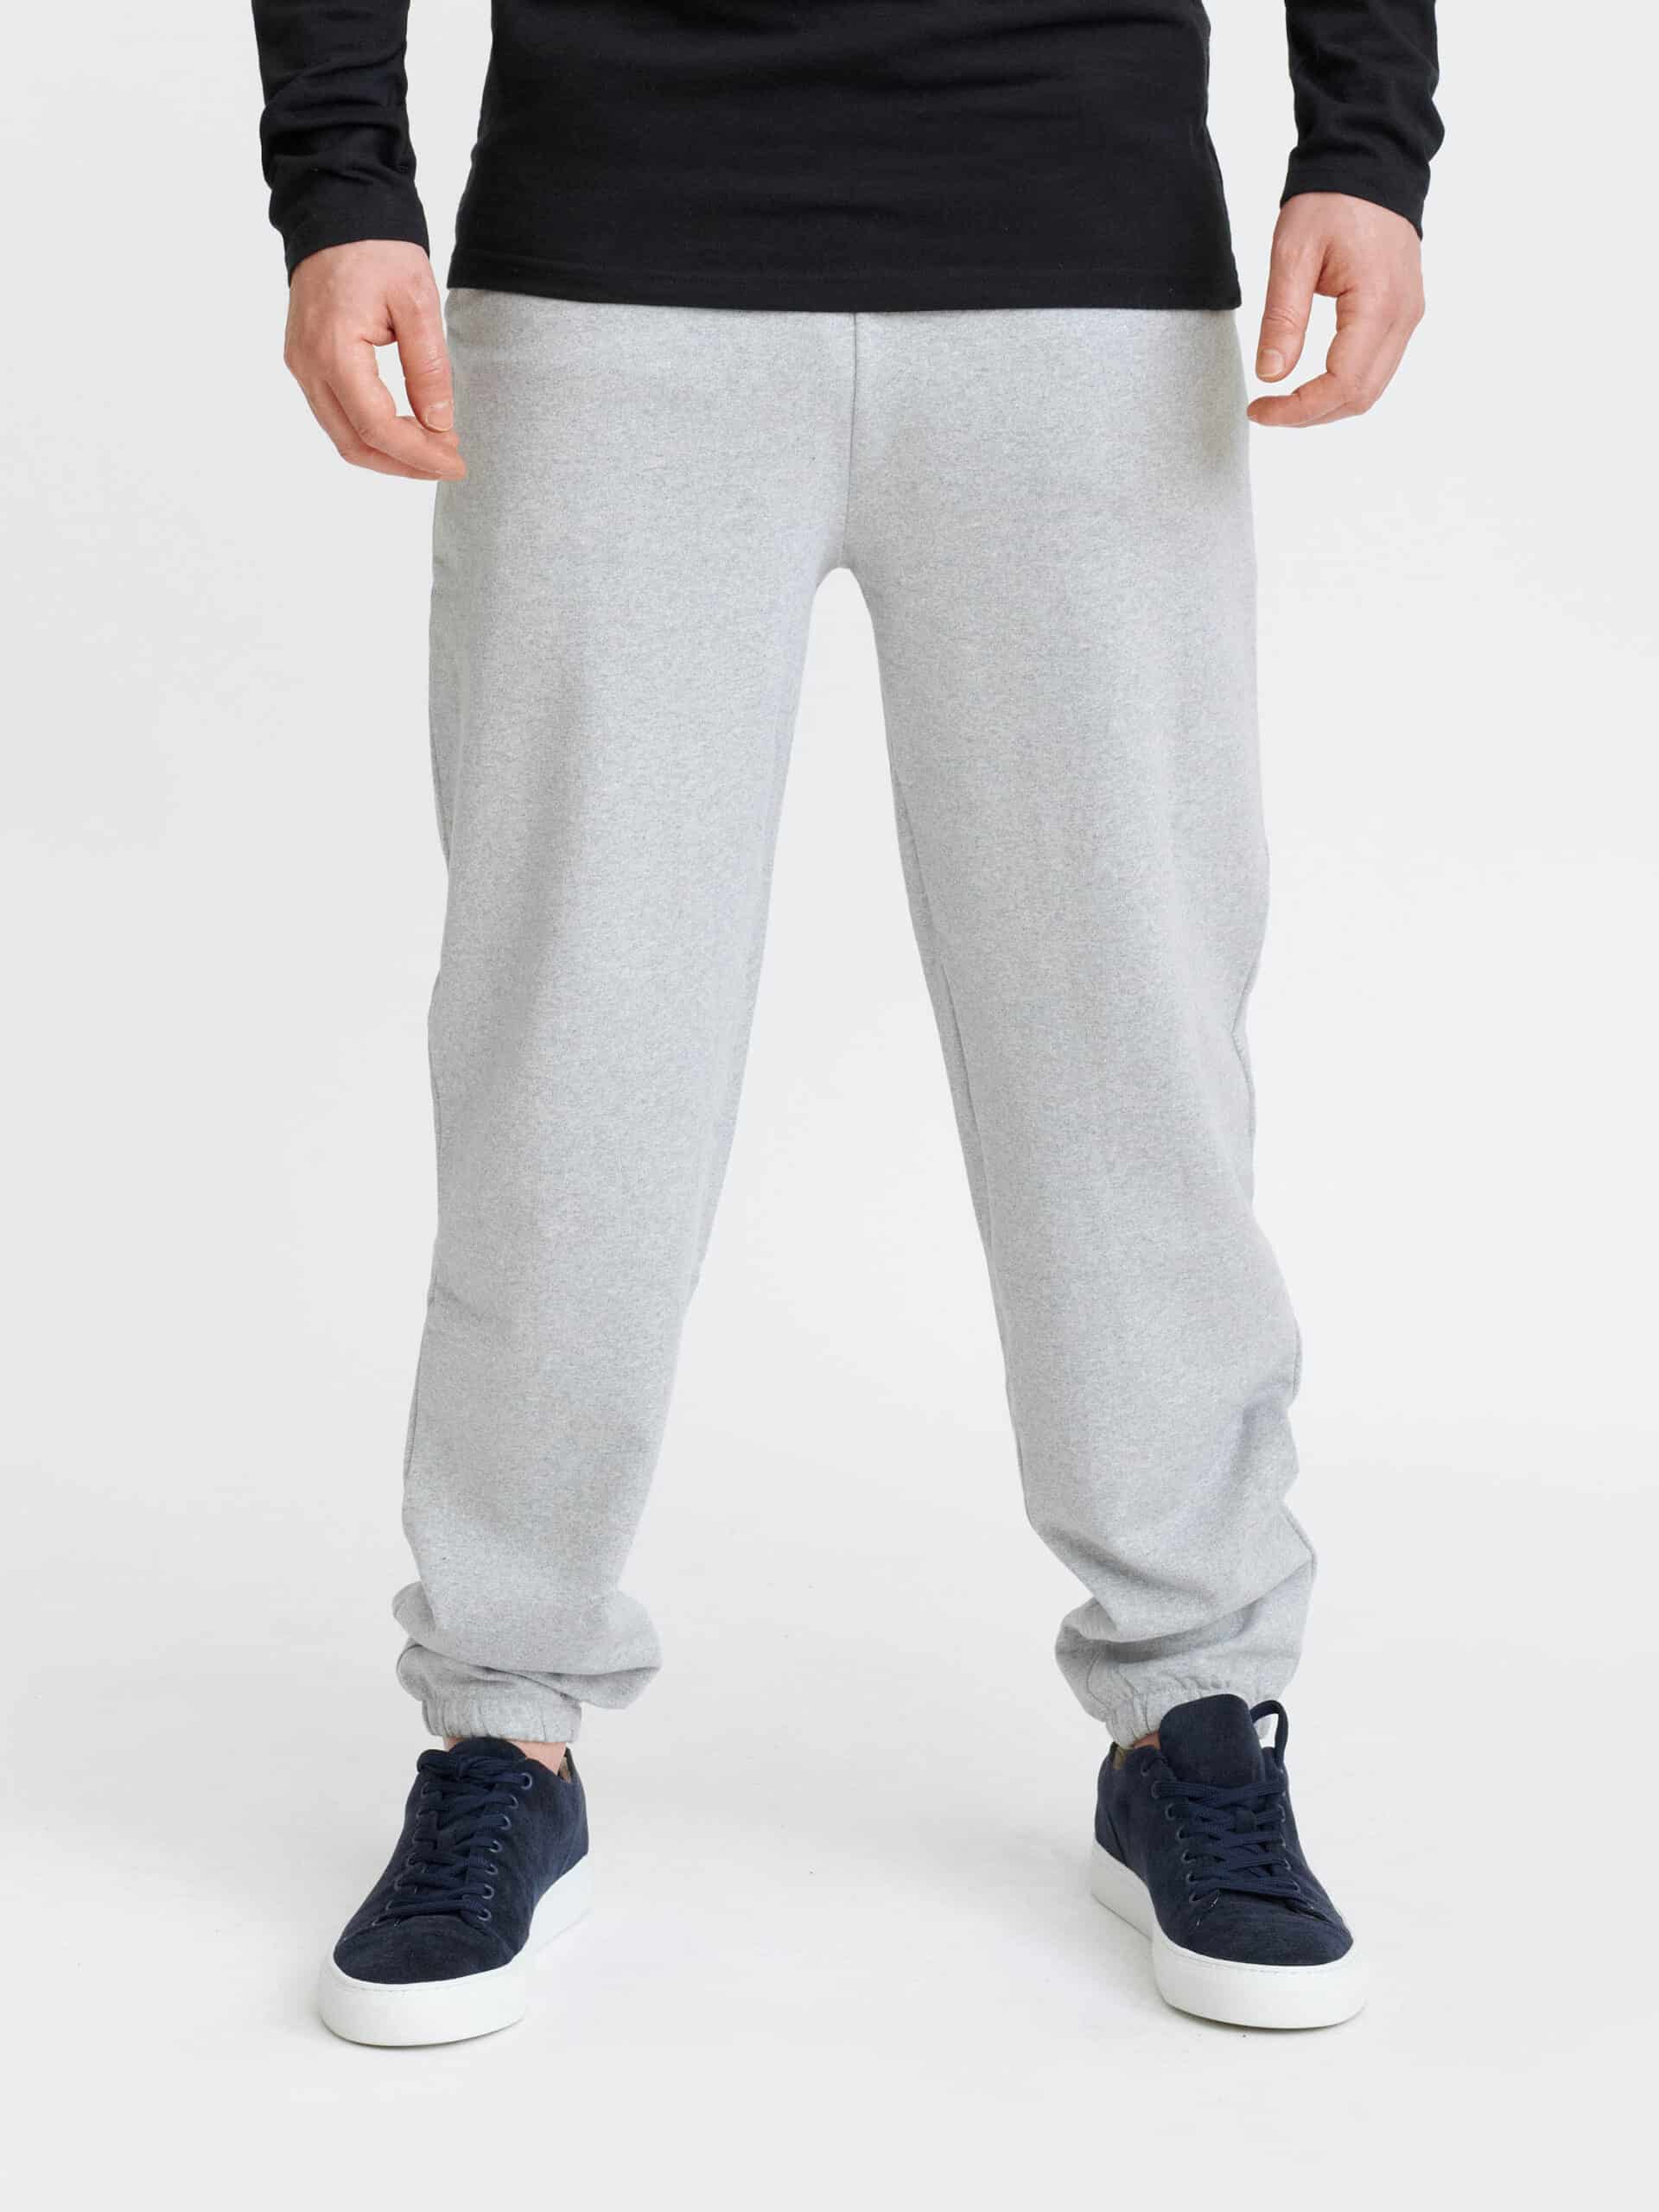 G Star Raw cargo joggers | Cargo joggers, Clothes design, G-star